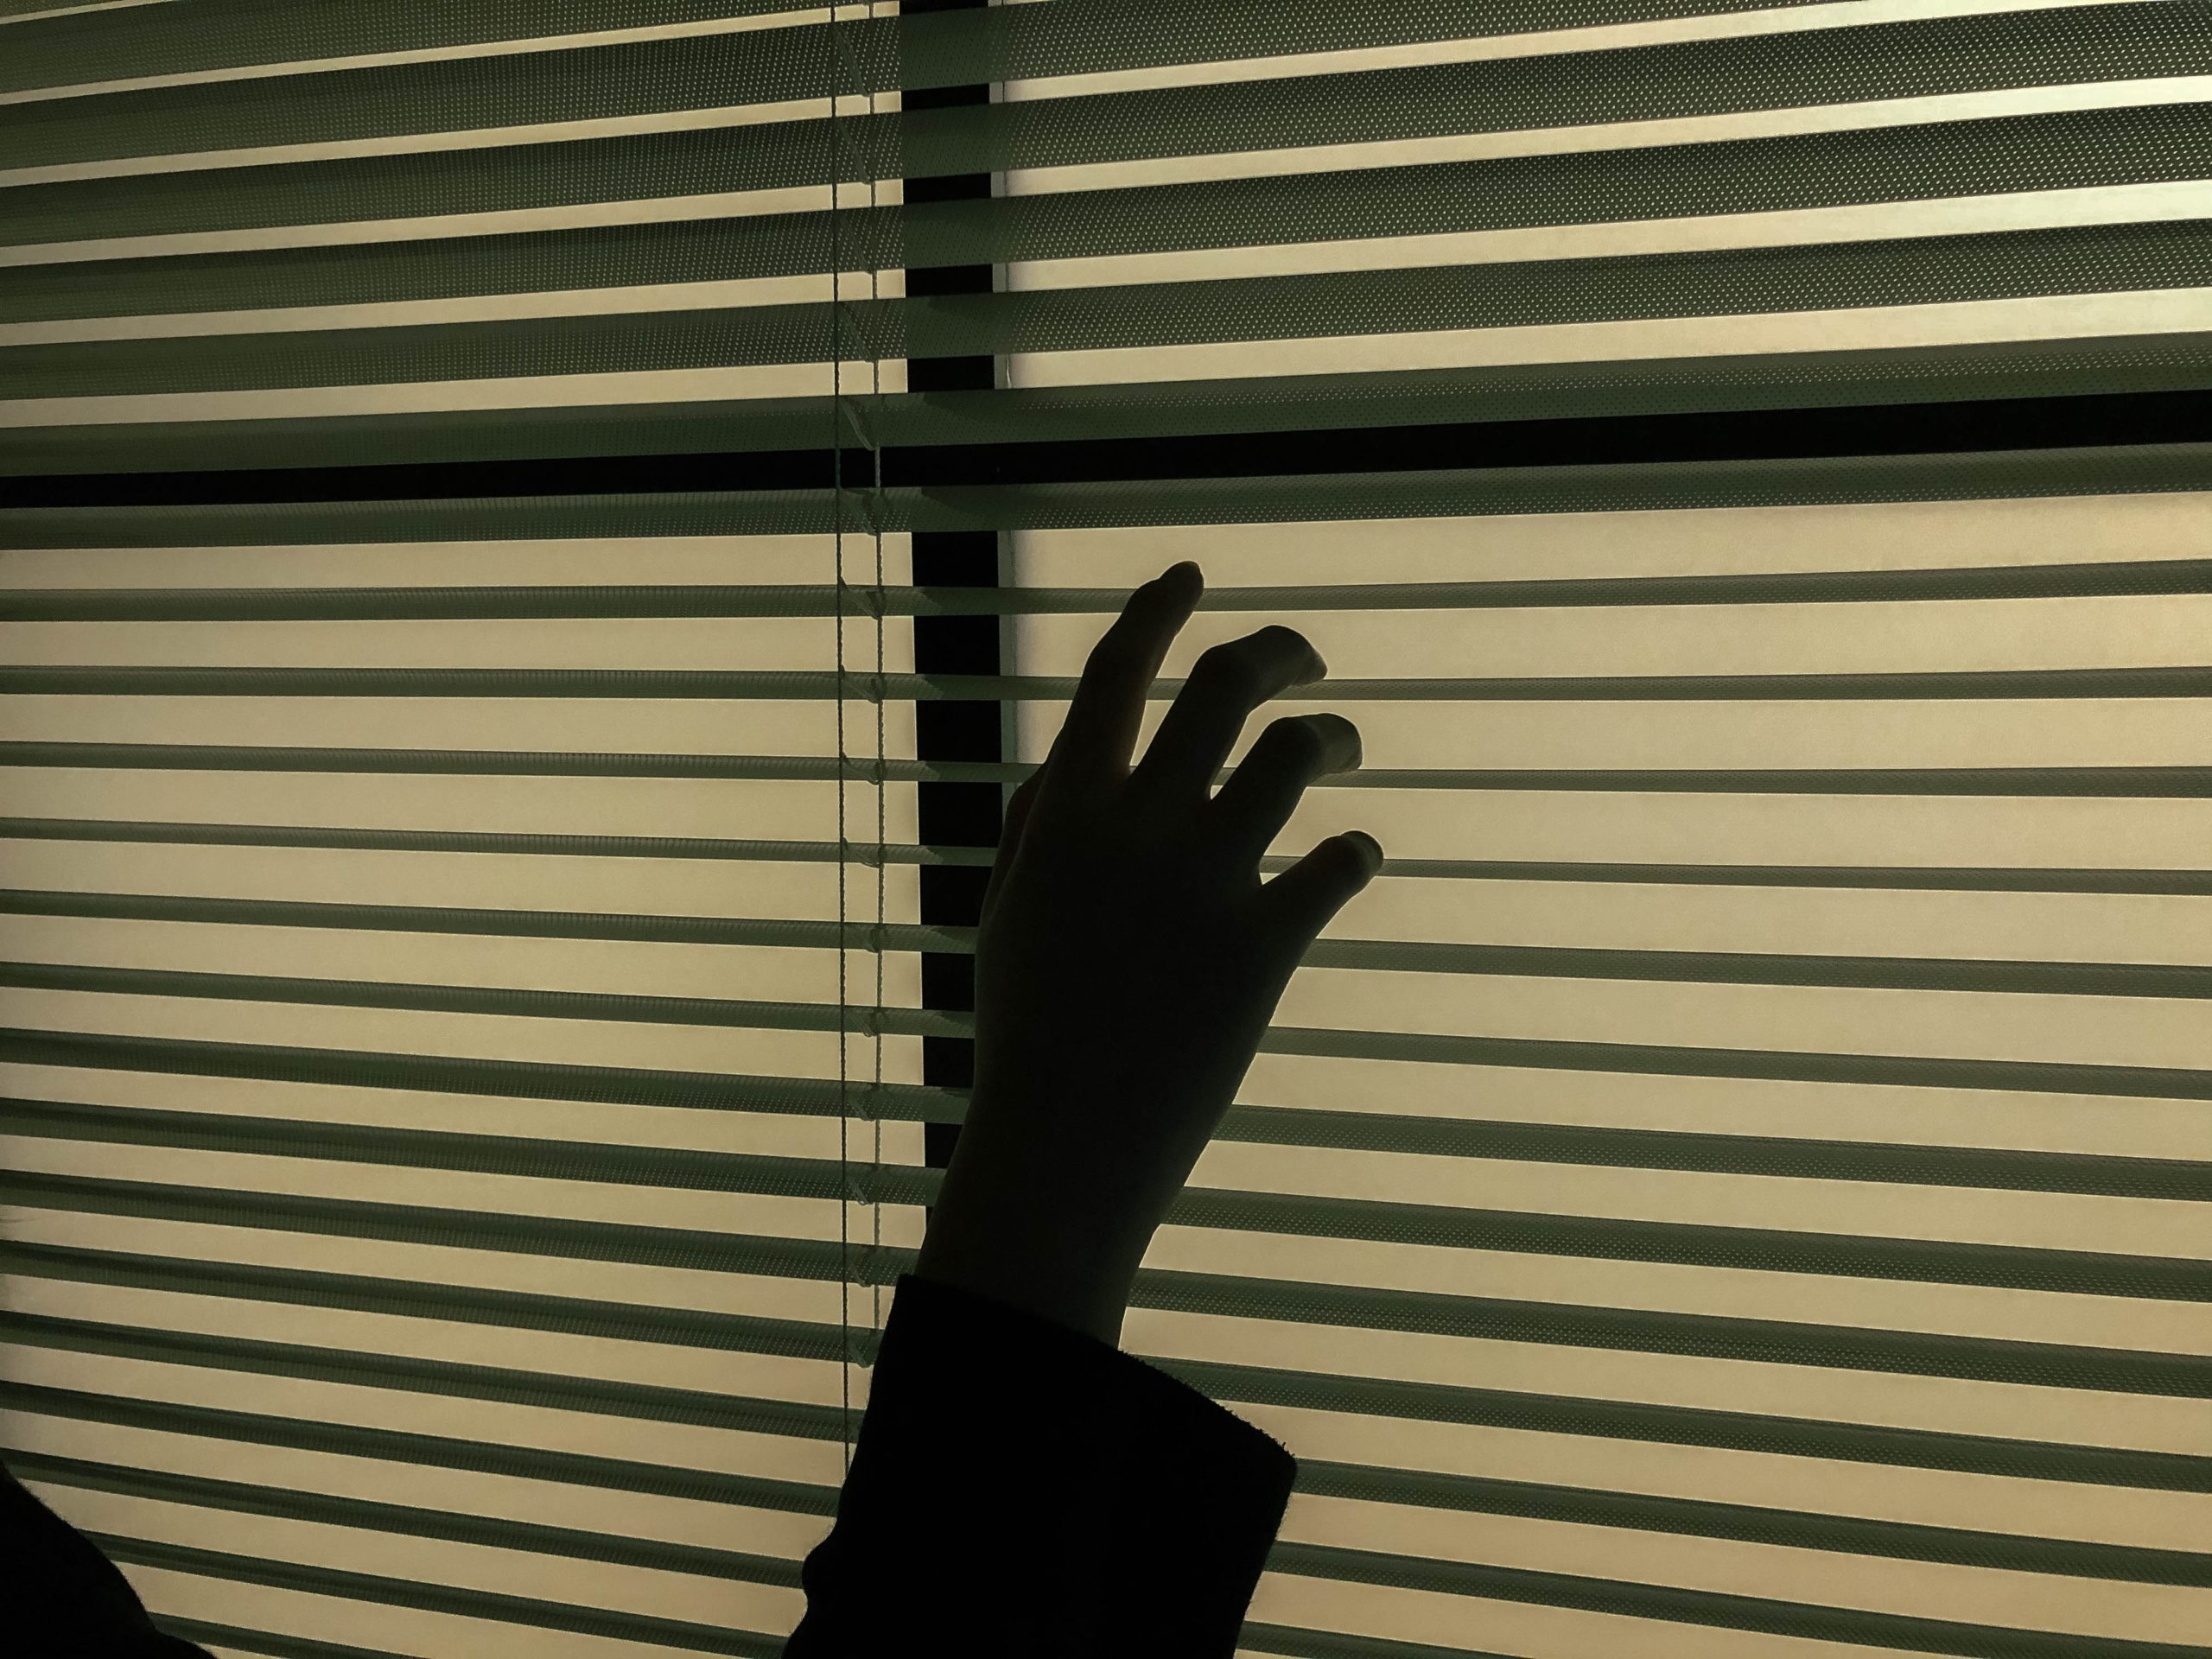 A hand against lowered blinds.